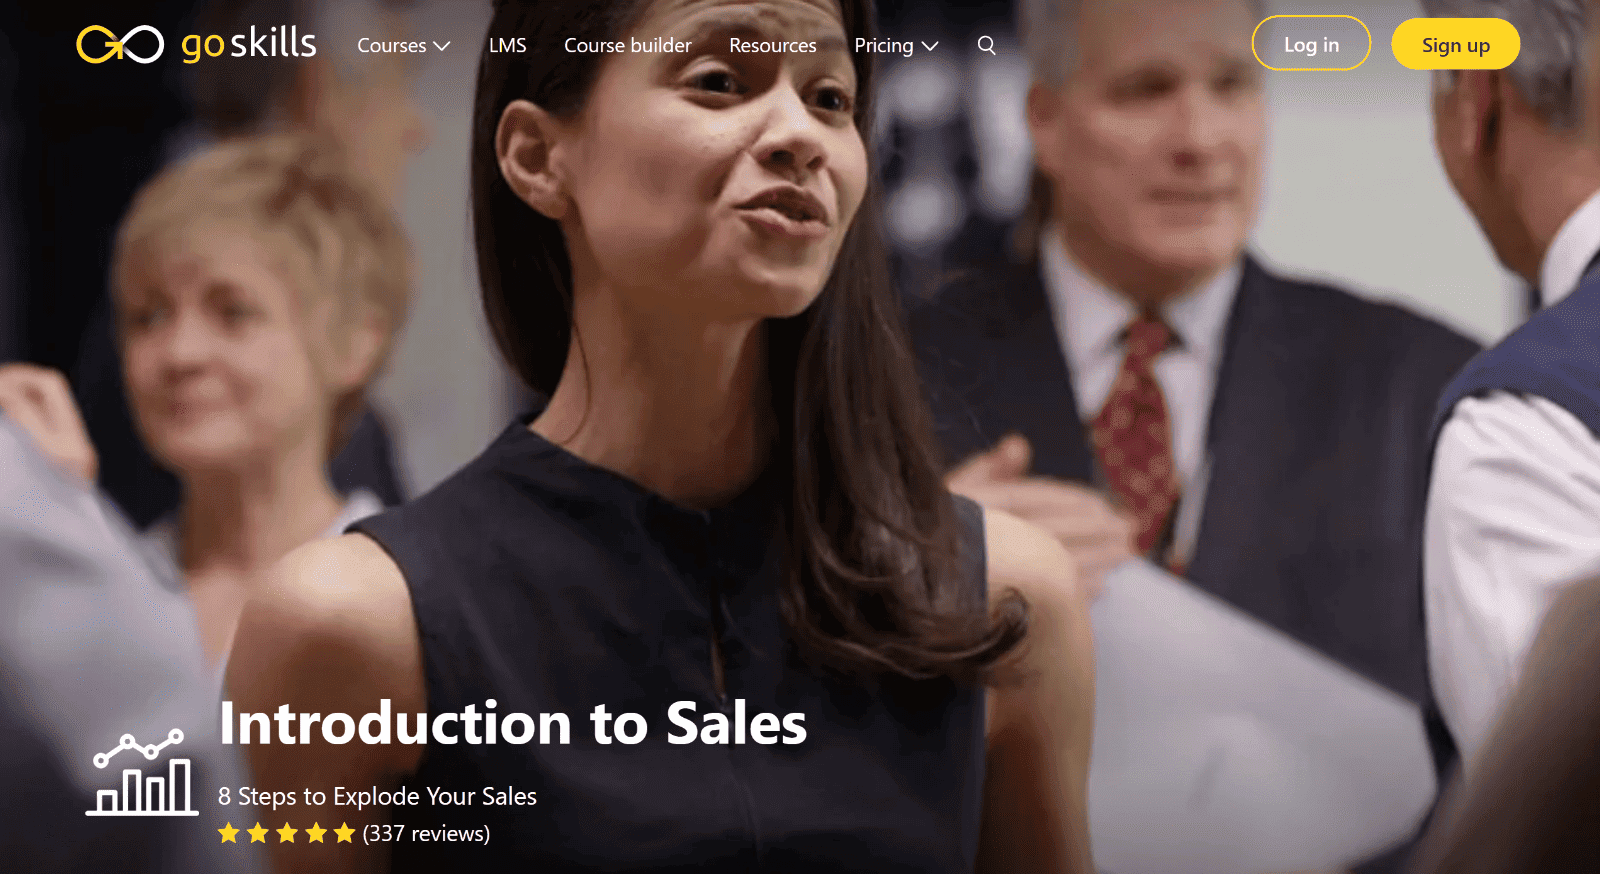 Introduction to Sales by GoSkills 